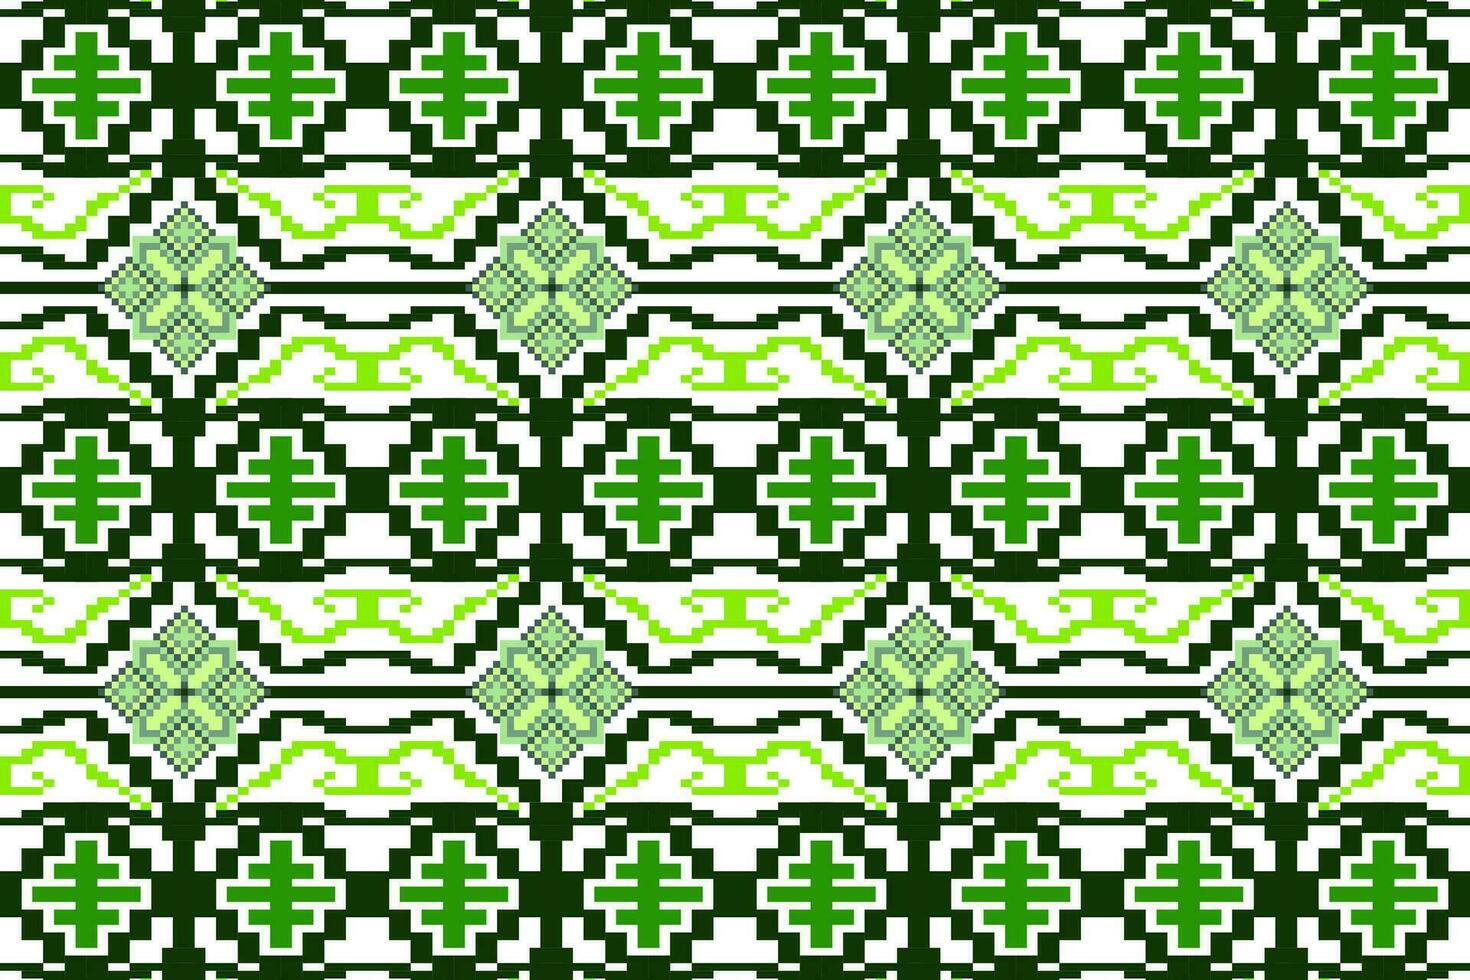 Seamless pattern. Aztec geometric vector background. Can be used in textile design, web design for making of clothes, accessories, decorative paper, backpack, wrapping, envelope, tile, etc.